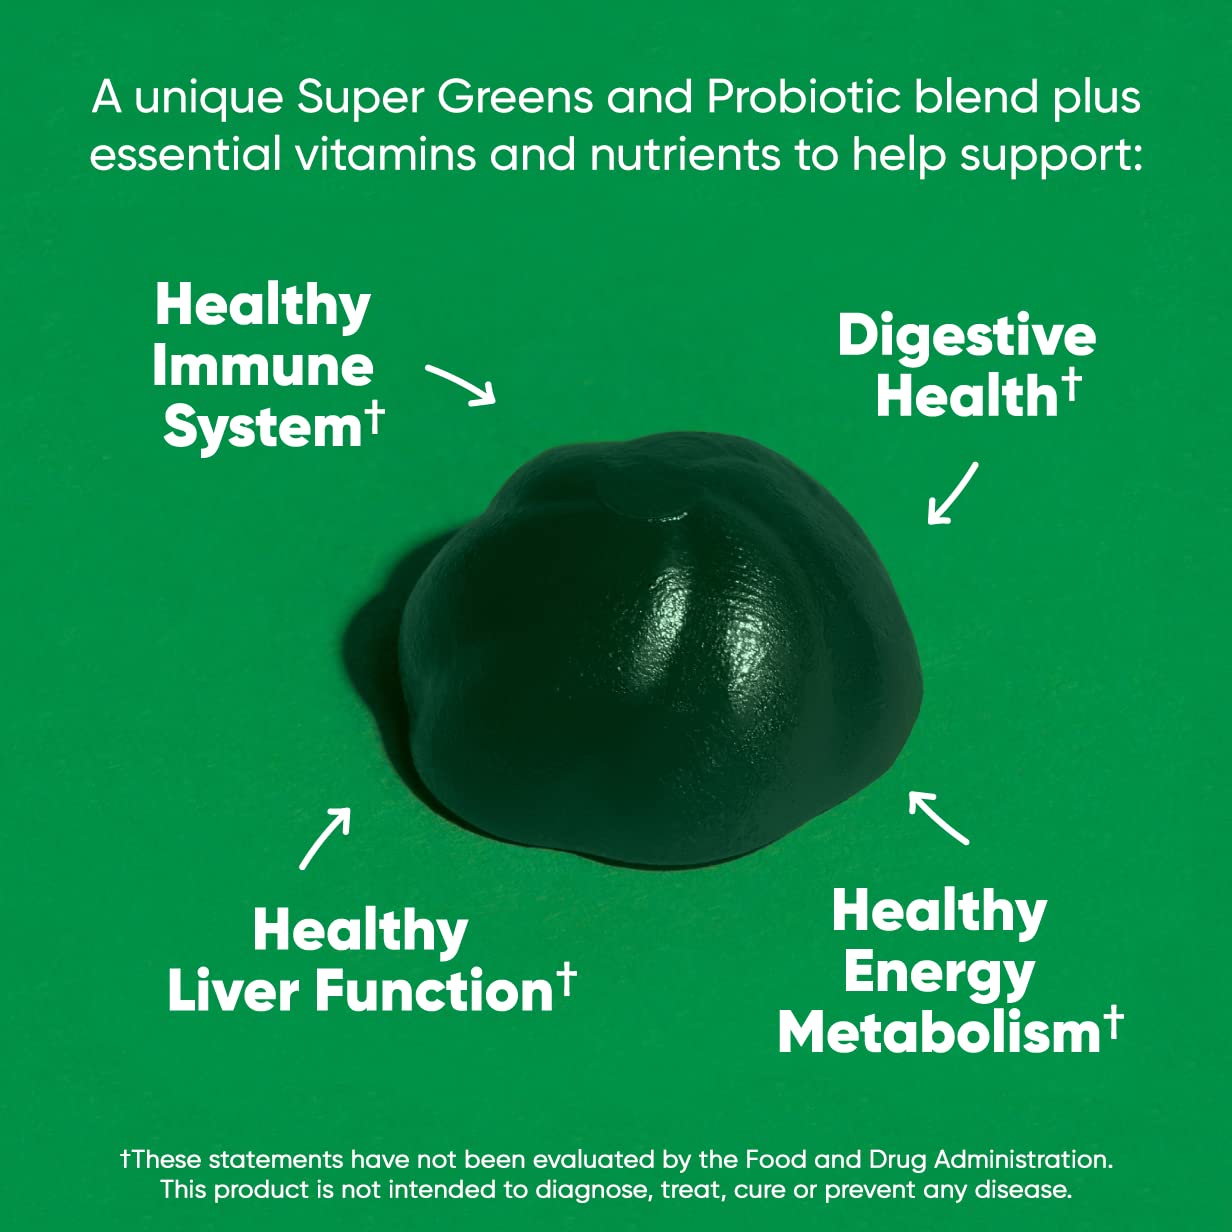 Goli Supergreens Gummies: Deliciously Nutrient-Rich Greens for Your Daily Health Boost!